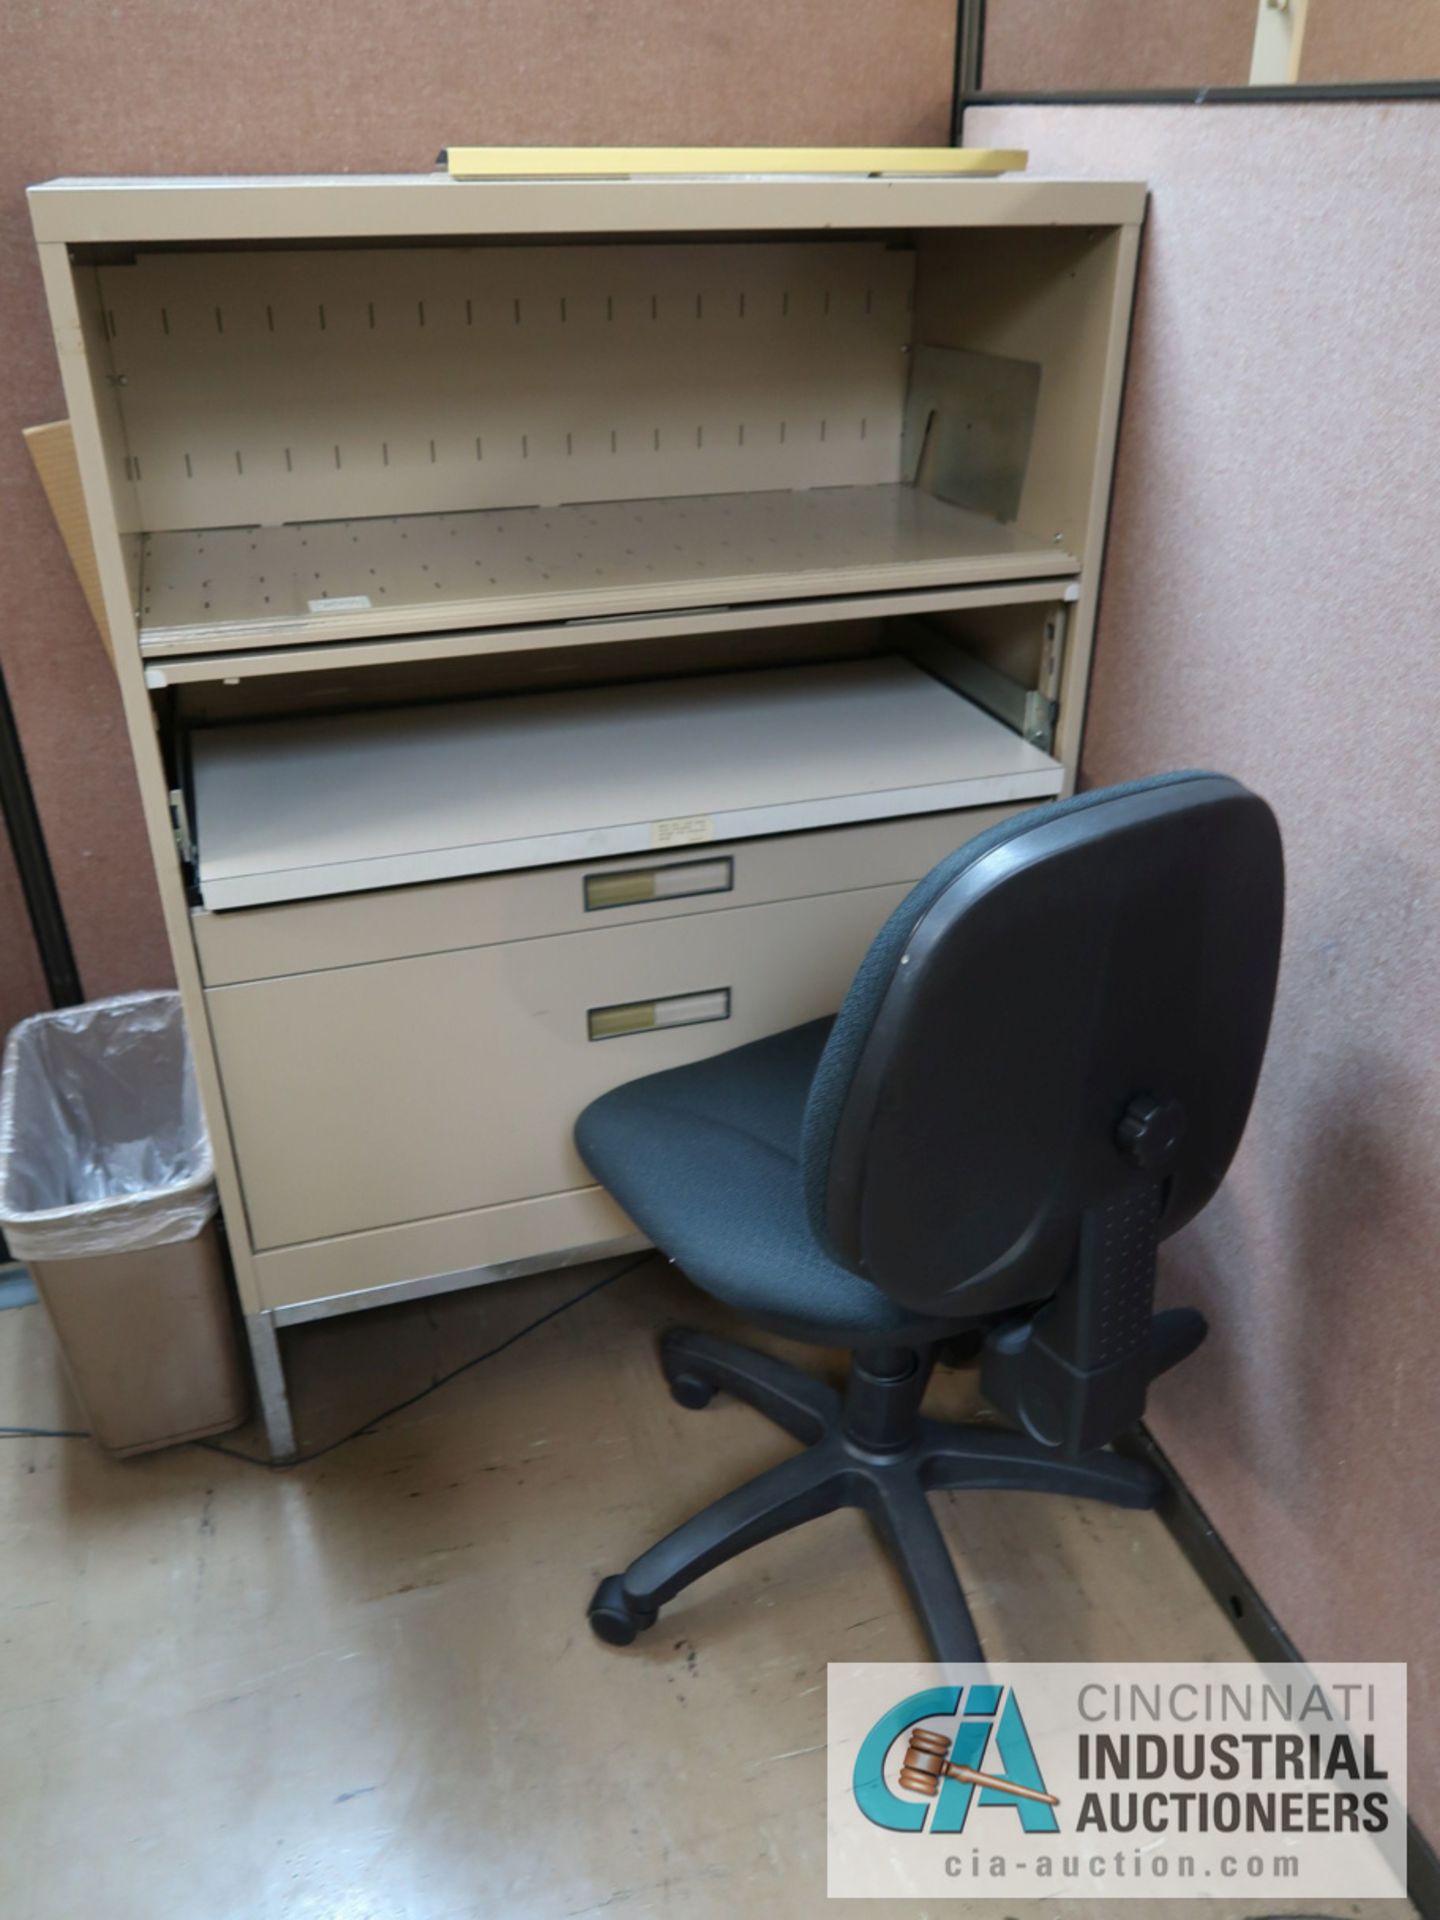 (LOT) FURNITURE IN CUBICAL INCLUDING (3) DESKS AND (2) CABINETS - Image 2 of 4